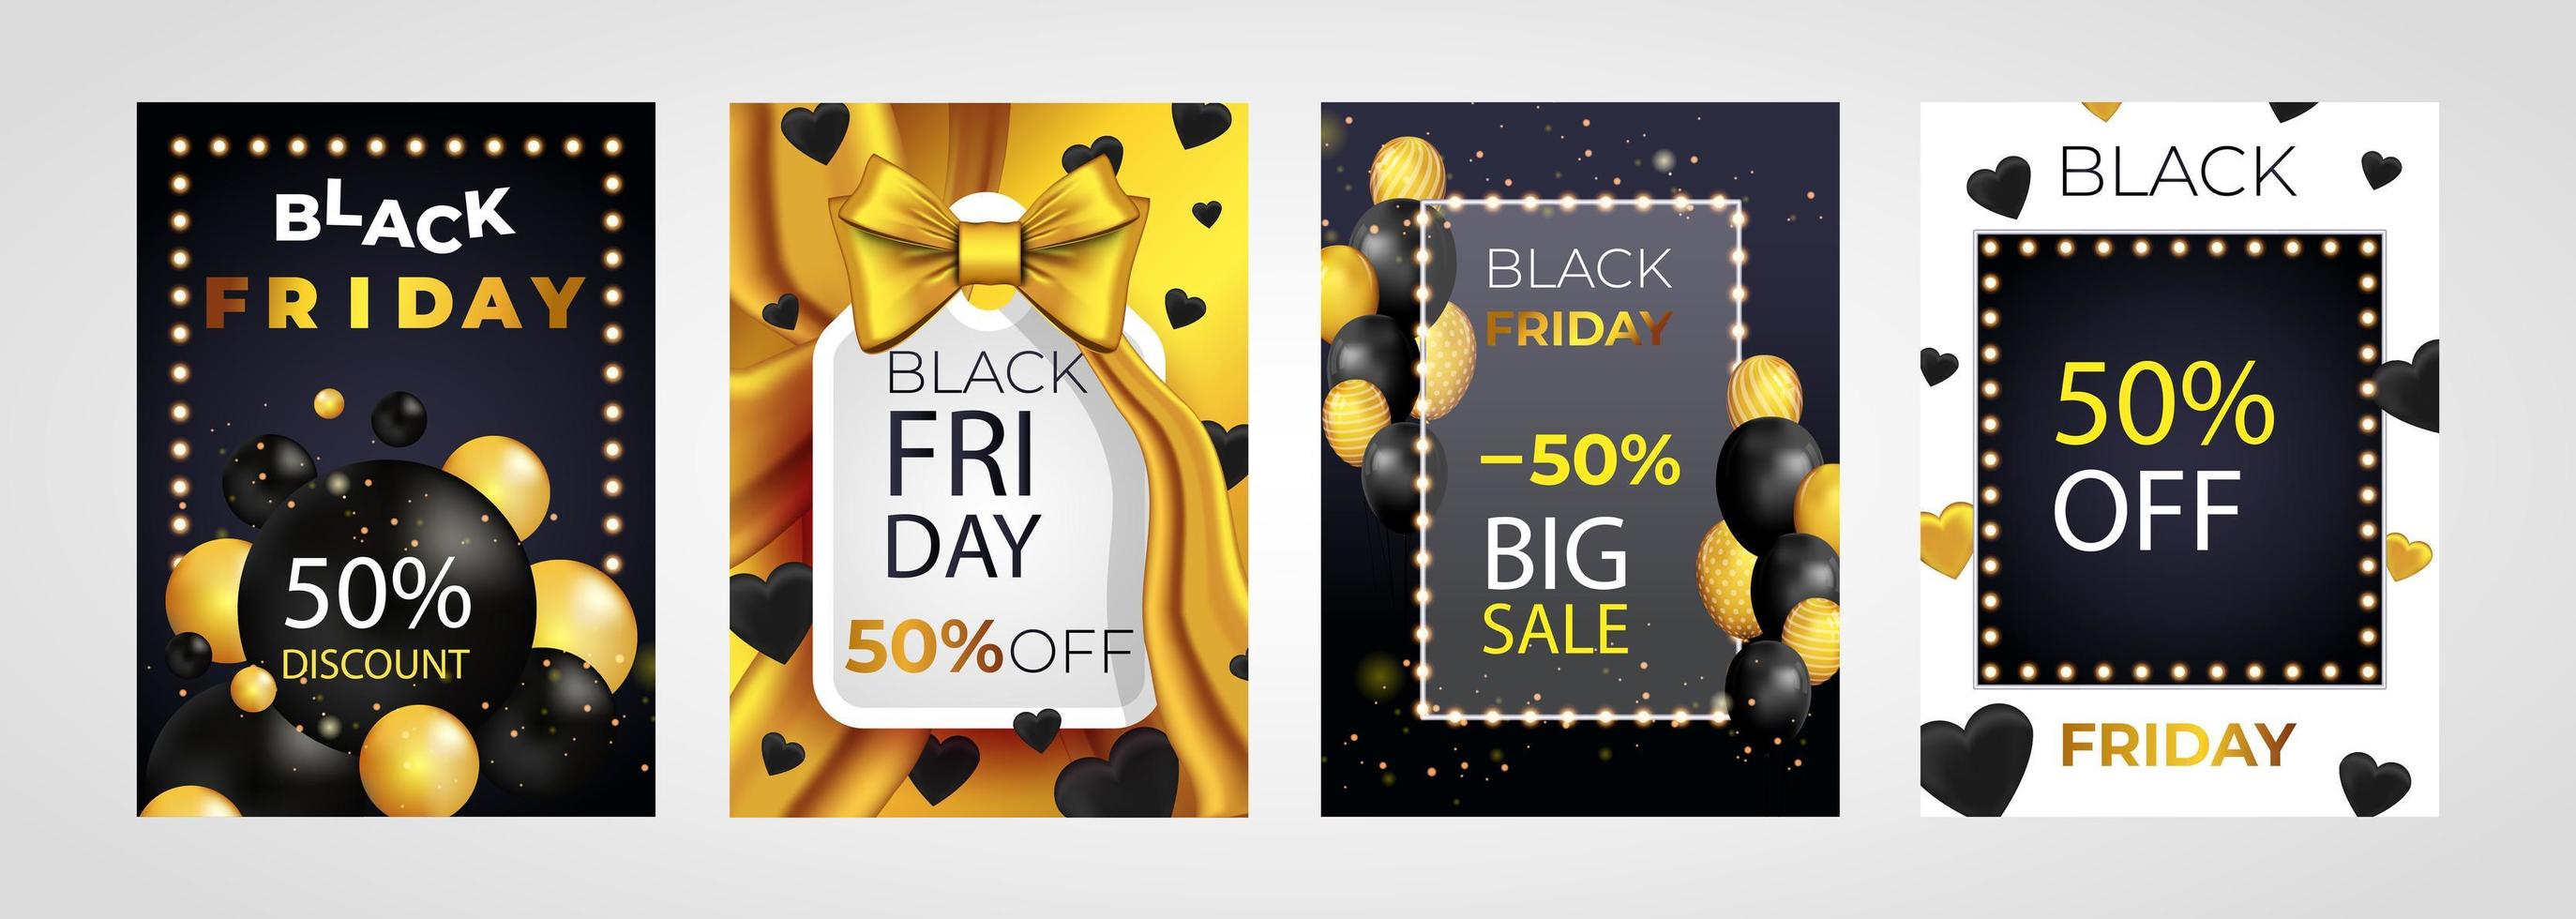 Black Friday Sale set of posters or flyers design with balloons and confetti. Black Friday cover design. Sale discount prices announcement brochure layout. Vector illustration with realistic elements.